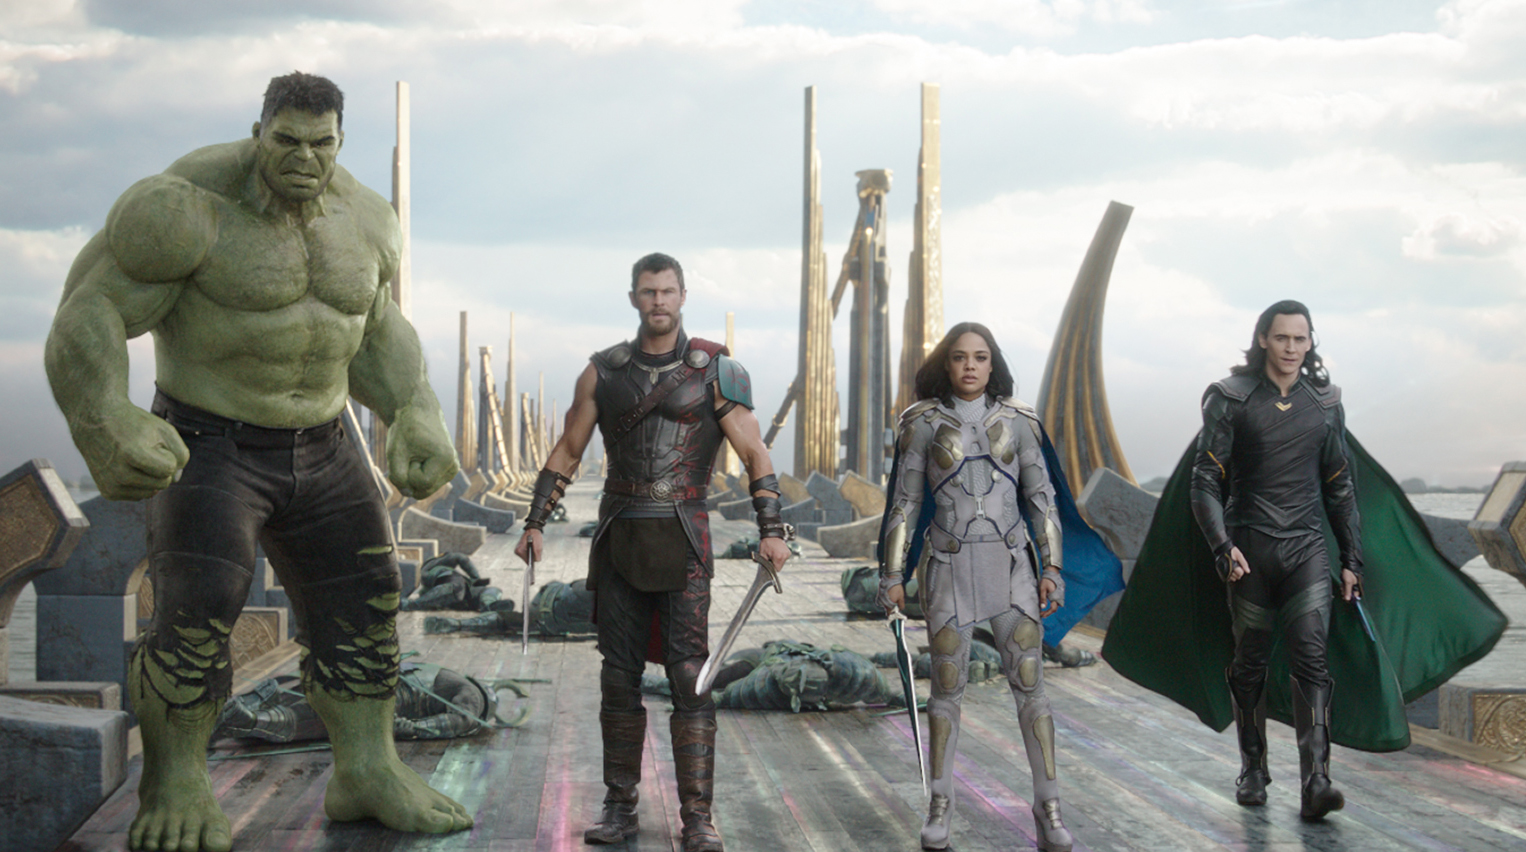 Everyone's Ready To Fight In New Thor: Ragnarok Character Posters, Movies